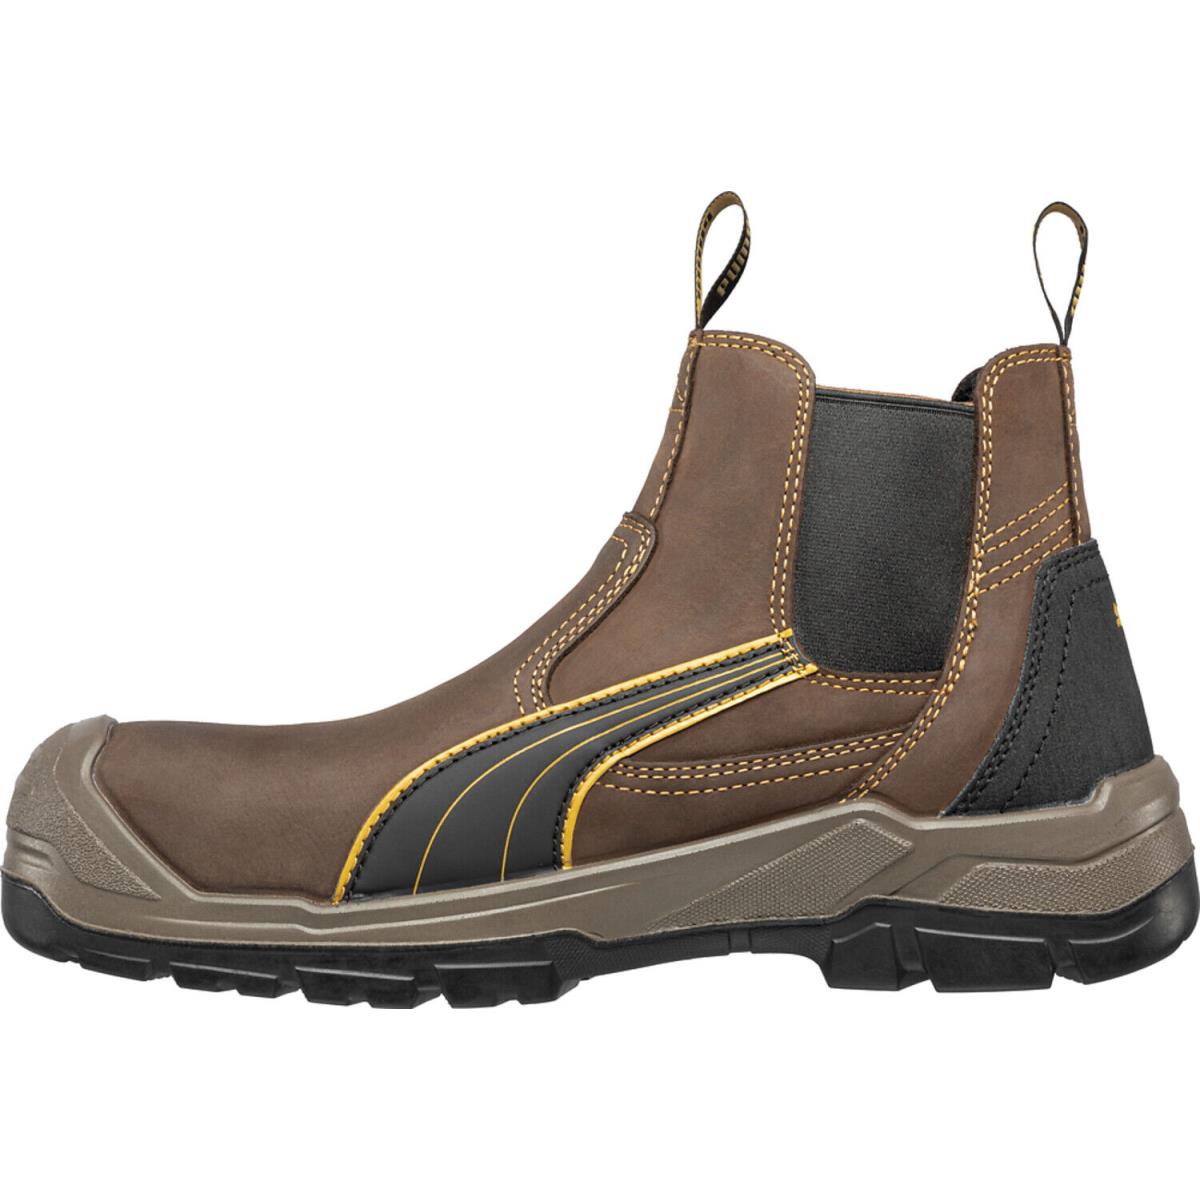 Puma Safety Mens Tanami Ctx Mid EH WP Astm Brown Leather Work Boots